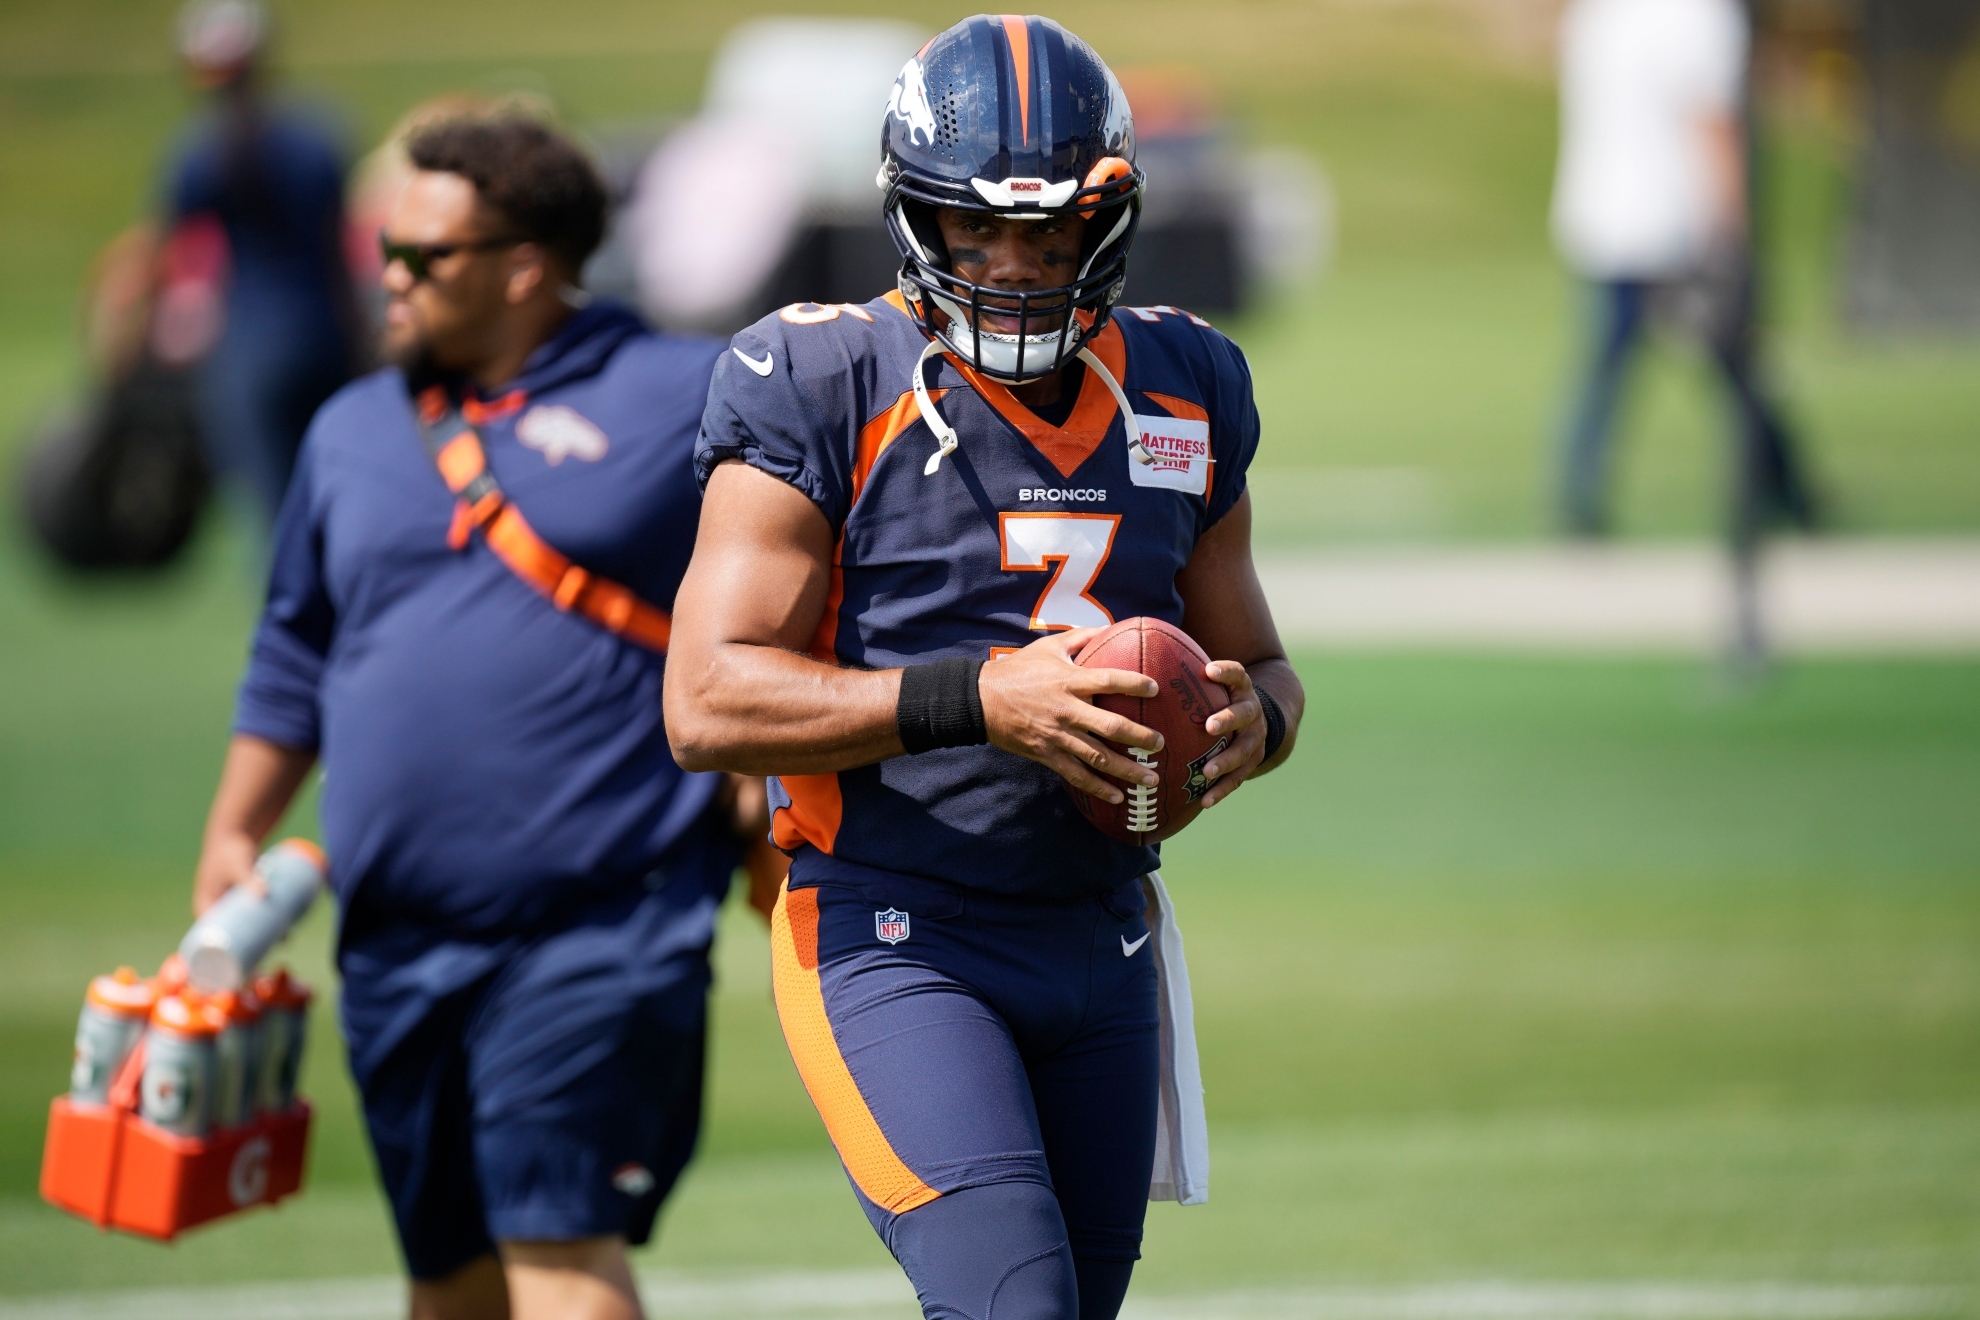 Denver Broncos quarterback Russell Wilson pauses during NFL football practice Thursday, Sept. 8, 2022, in Centennial, Colo. The Broncos open their schedule Monday night against the Seahawks in Seattle